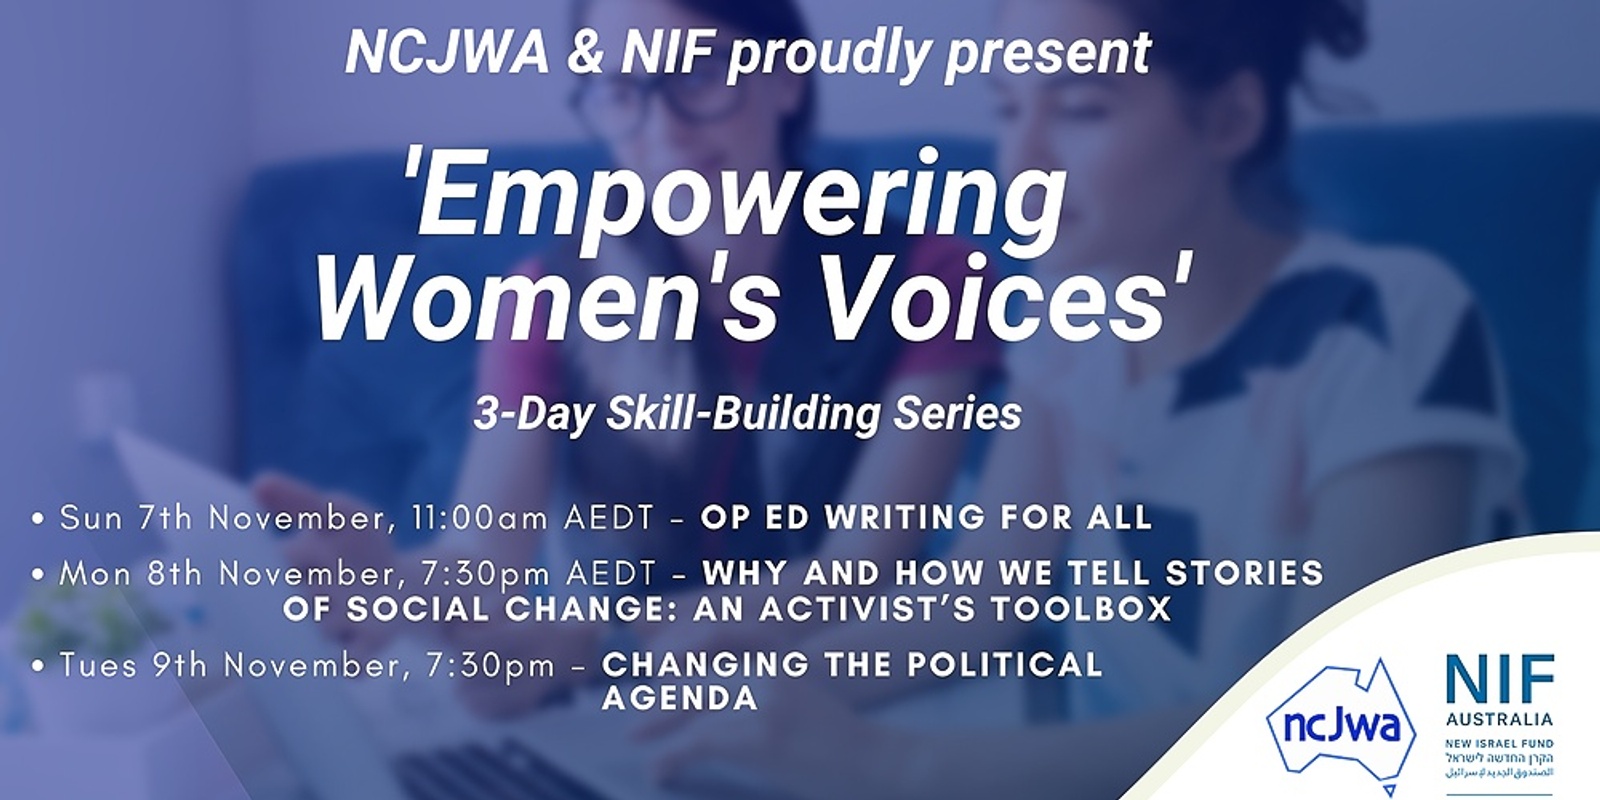 Banner image for NCJWA & NIF Skill-Building Series - 'Empowering Women's Voices'